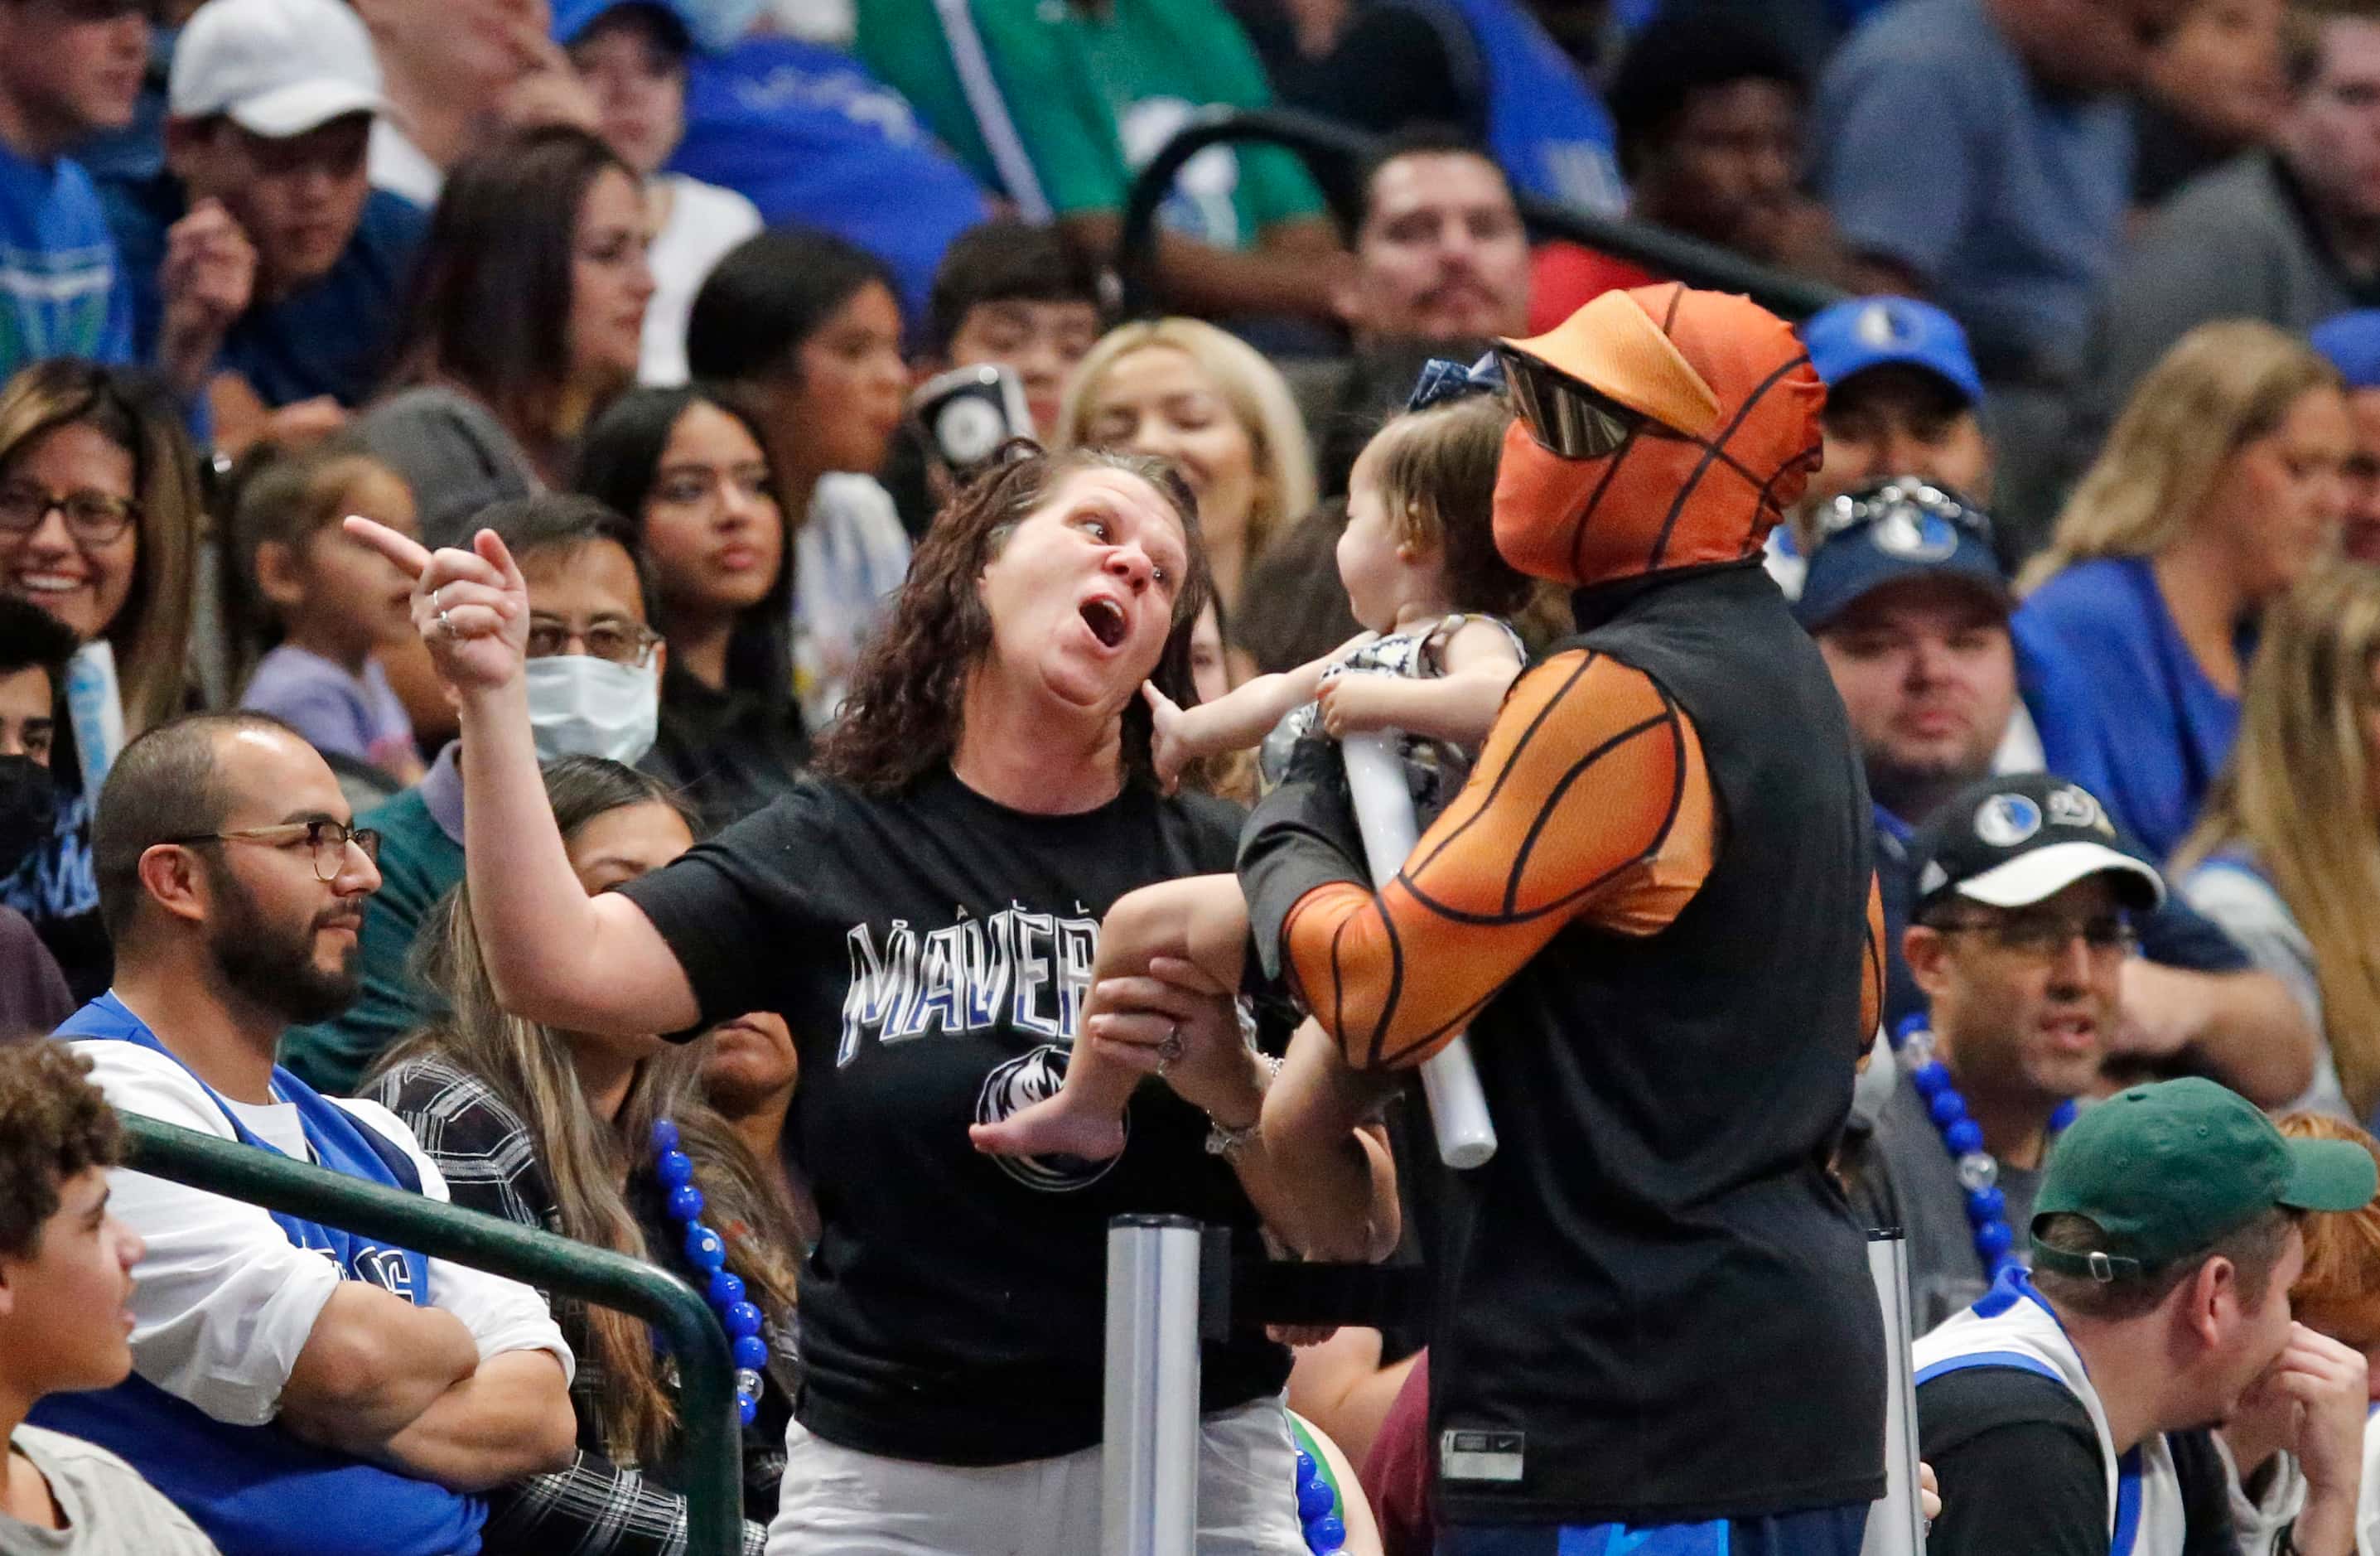 Mavs Man posed for pictures with babies at the Mavs Fan Jam, a free scrimmage for the fans...